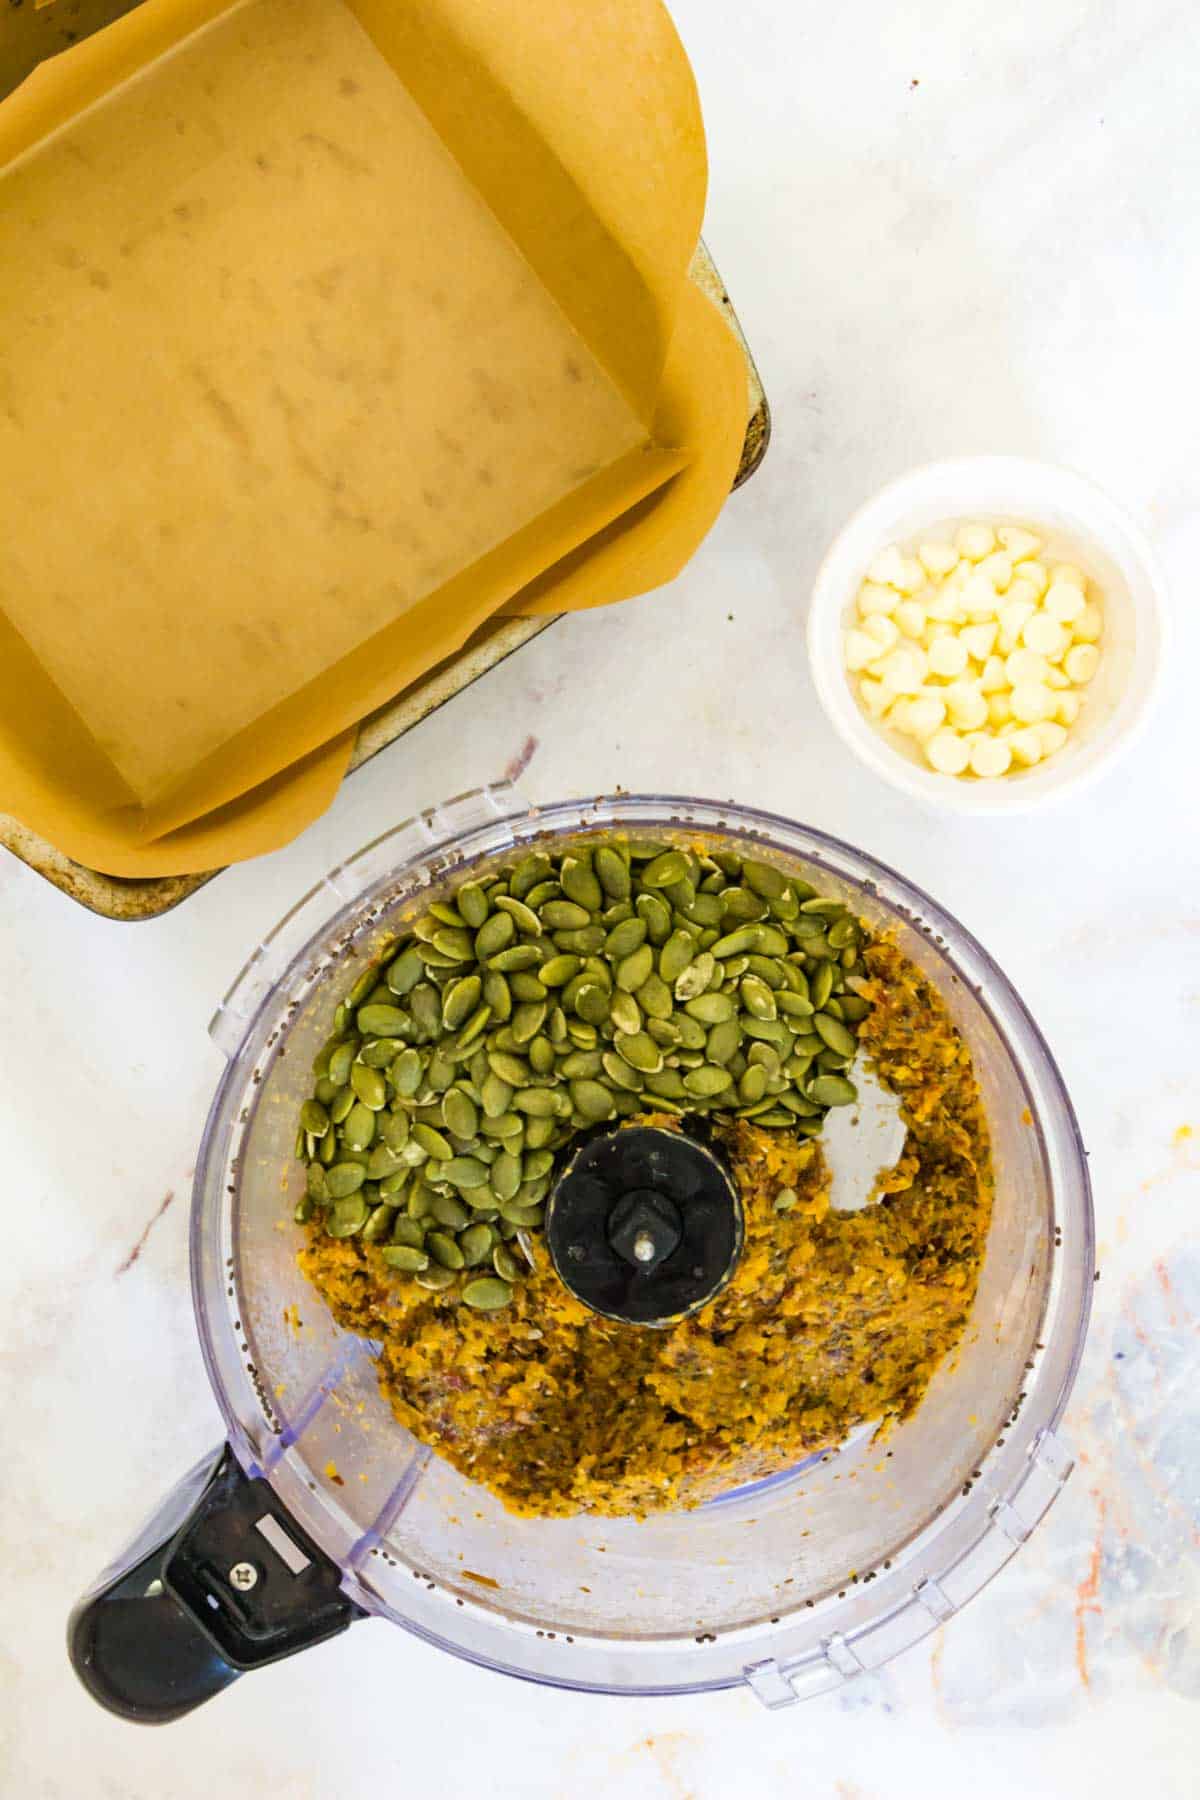 The energy bar mixture in the food processor with pumpkin seeds added to it.